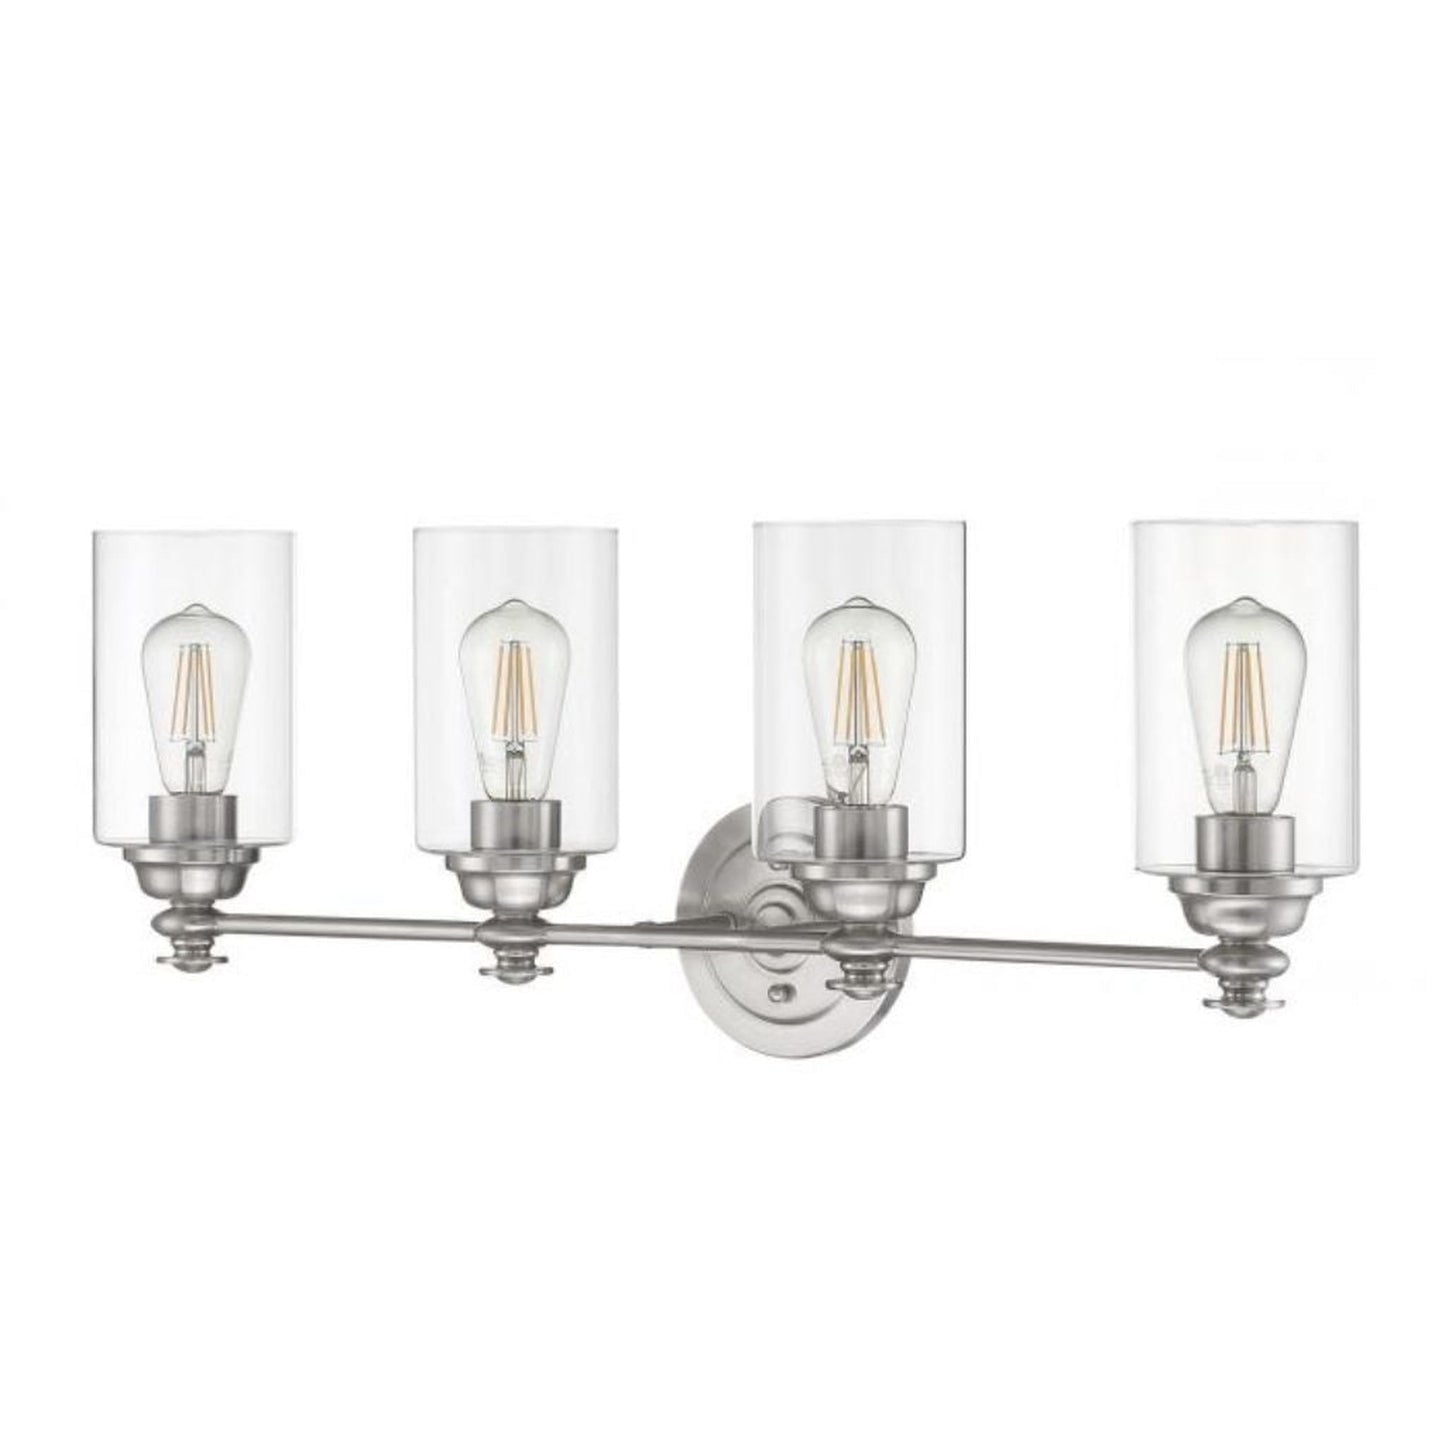 Craftmade Dardyn 30" 4-Light Brushed Polished Nickel Vanity Light With Clear Glass Shades